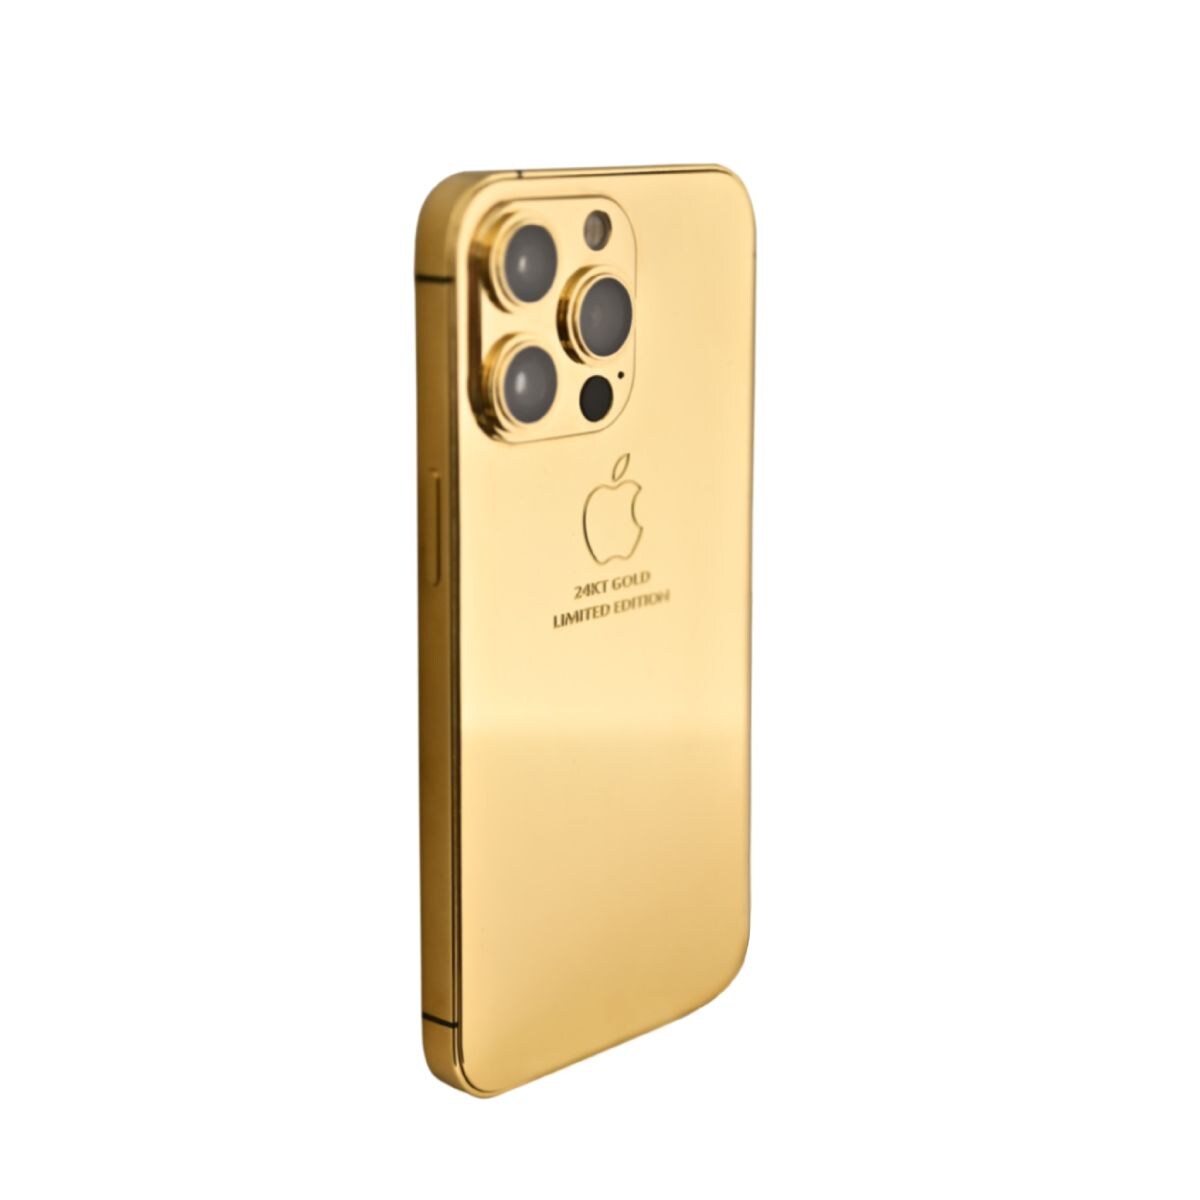 Caviar Luxury Limited Edition 24k Full Gold Customized iPhone 14 Pro Max, 128 GB